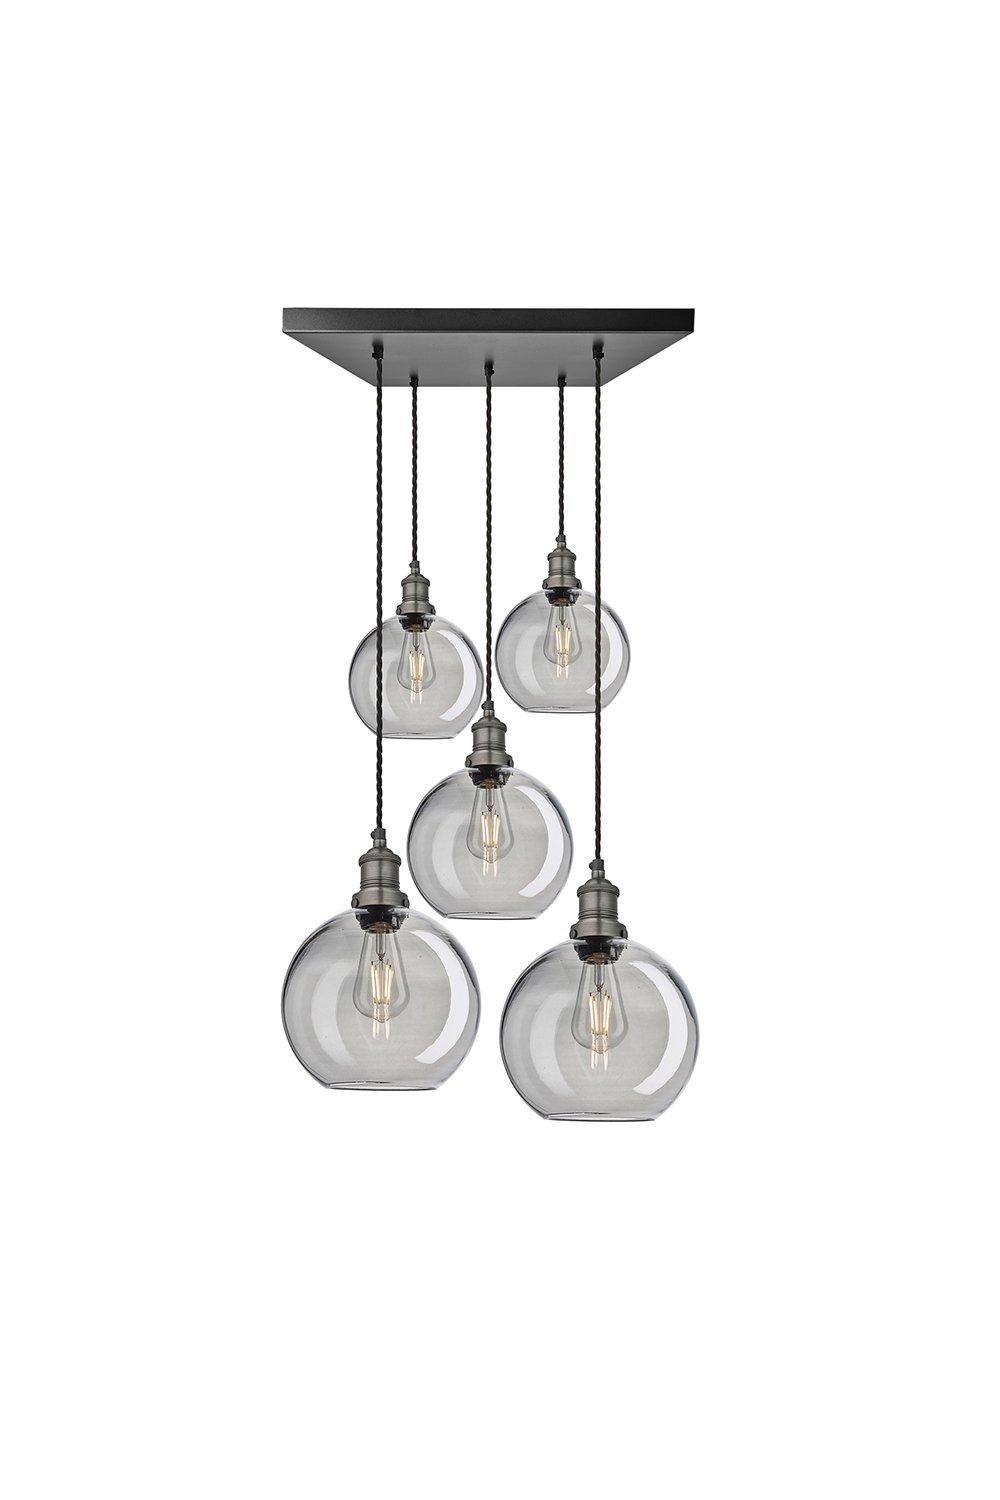 Brooklyn Tinted Glass Globe 5 Wire Square Cluster Lights, 9 inch, Smoke Grey, Pewter holder